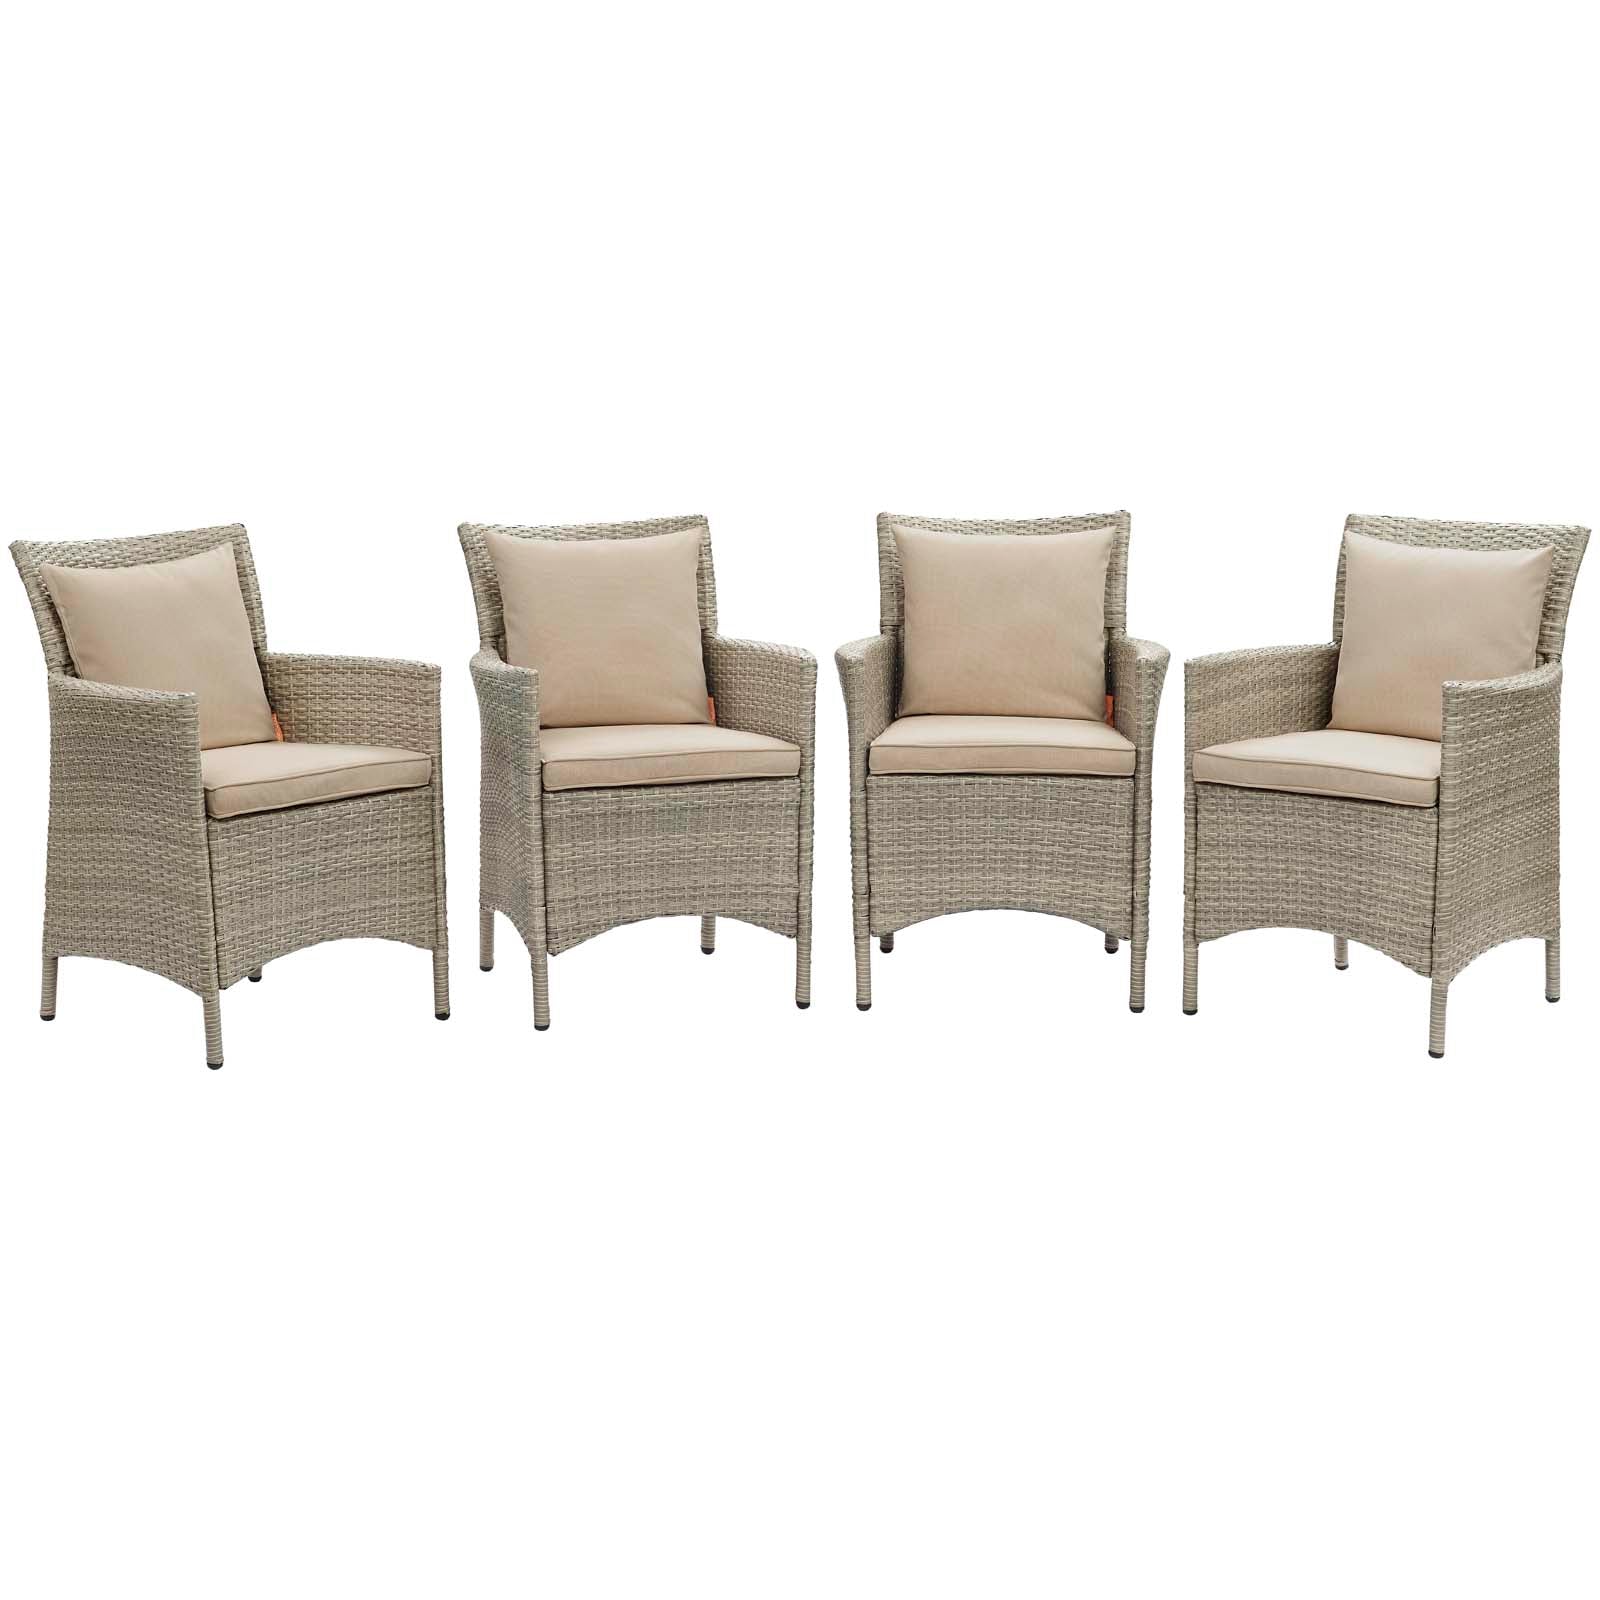 Modway Outdoor Dining Chairs - Conduit Outdoor Patio Wicker Rattan Dining Armchair Set of 4 Light Gray Beige